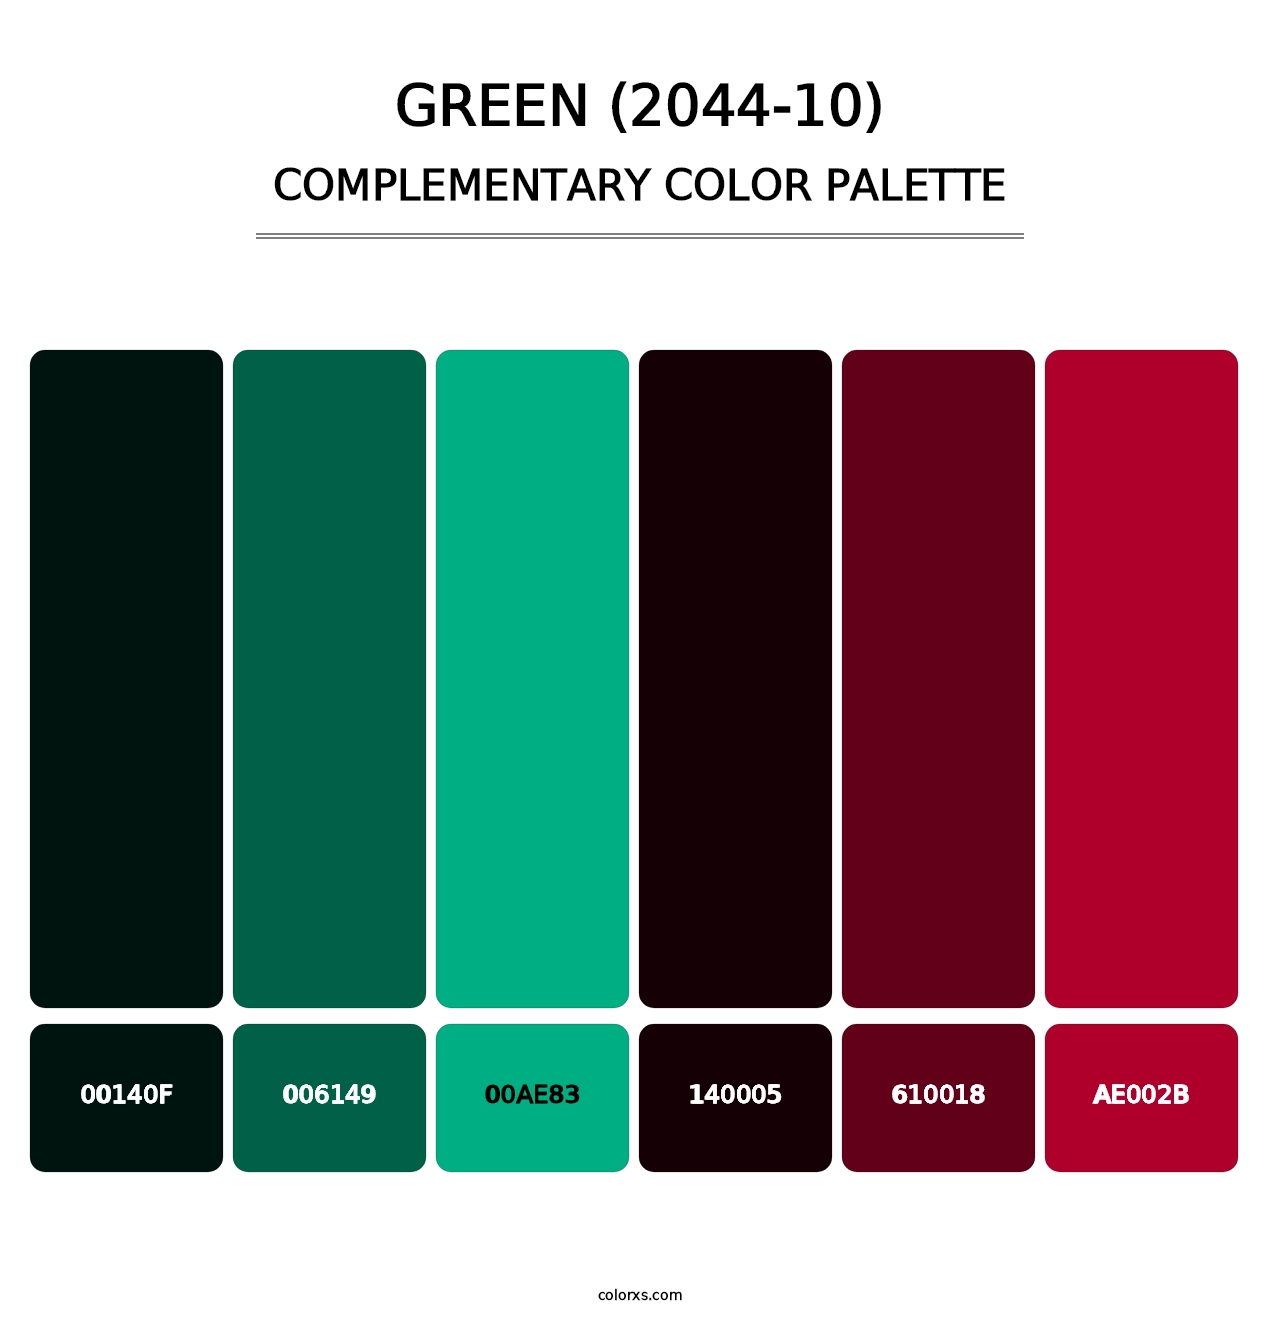 Green (2044-10) - Complementary Color Palette